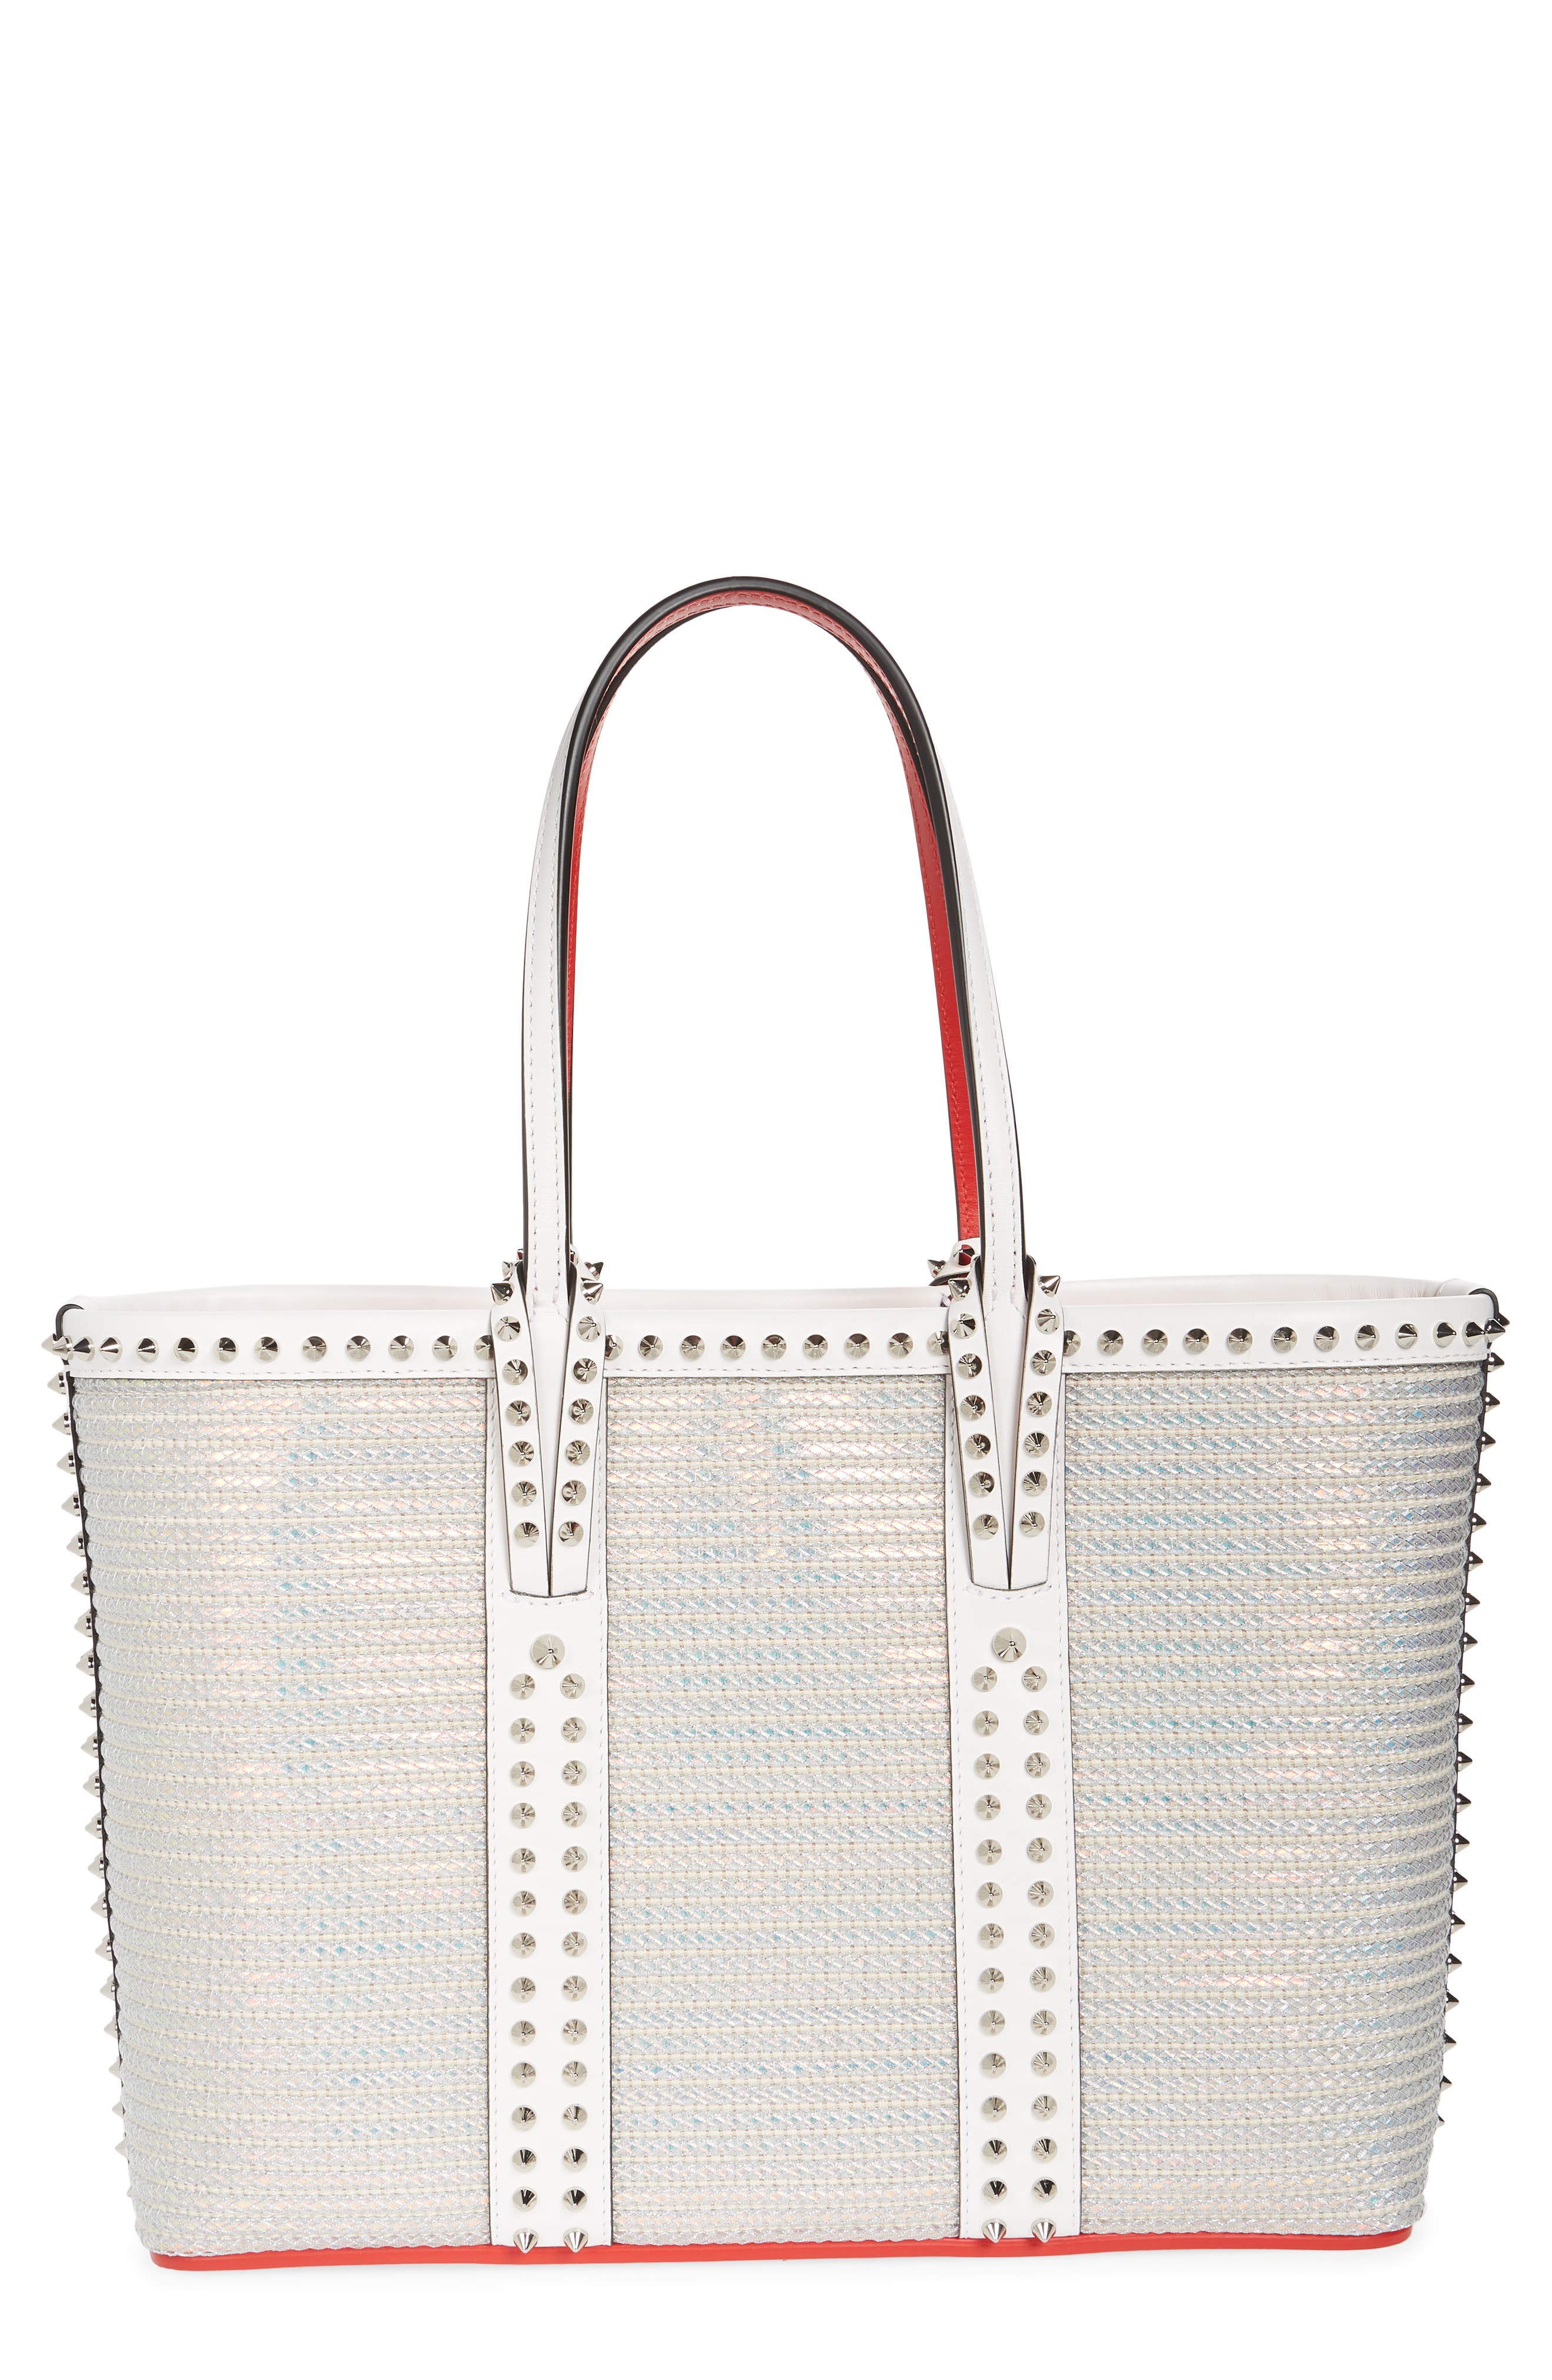 christian louboutin bags nordstrom